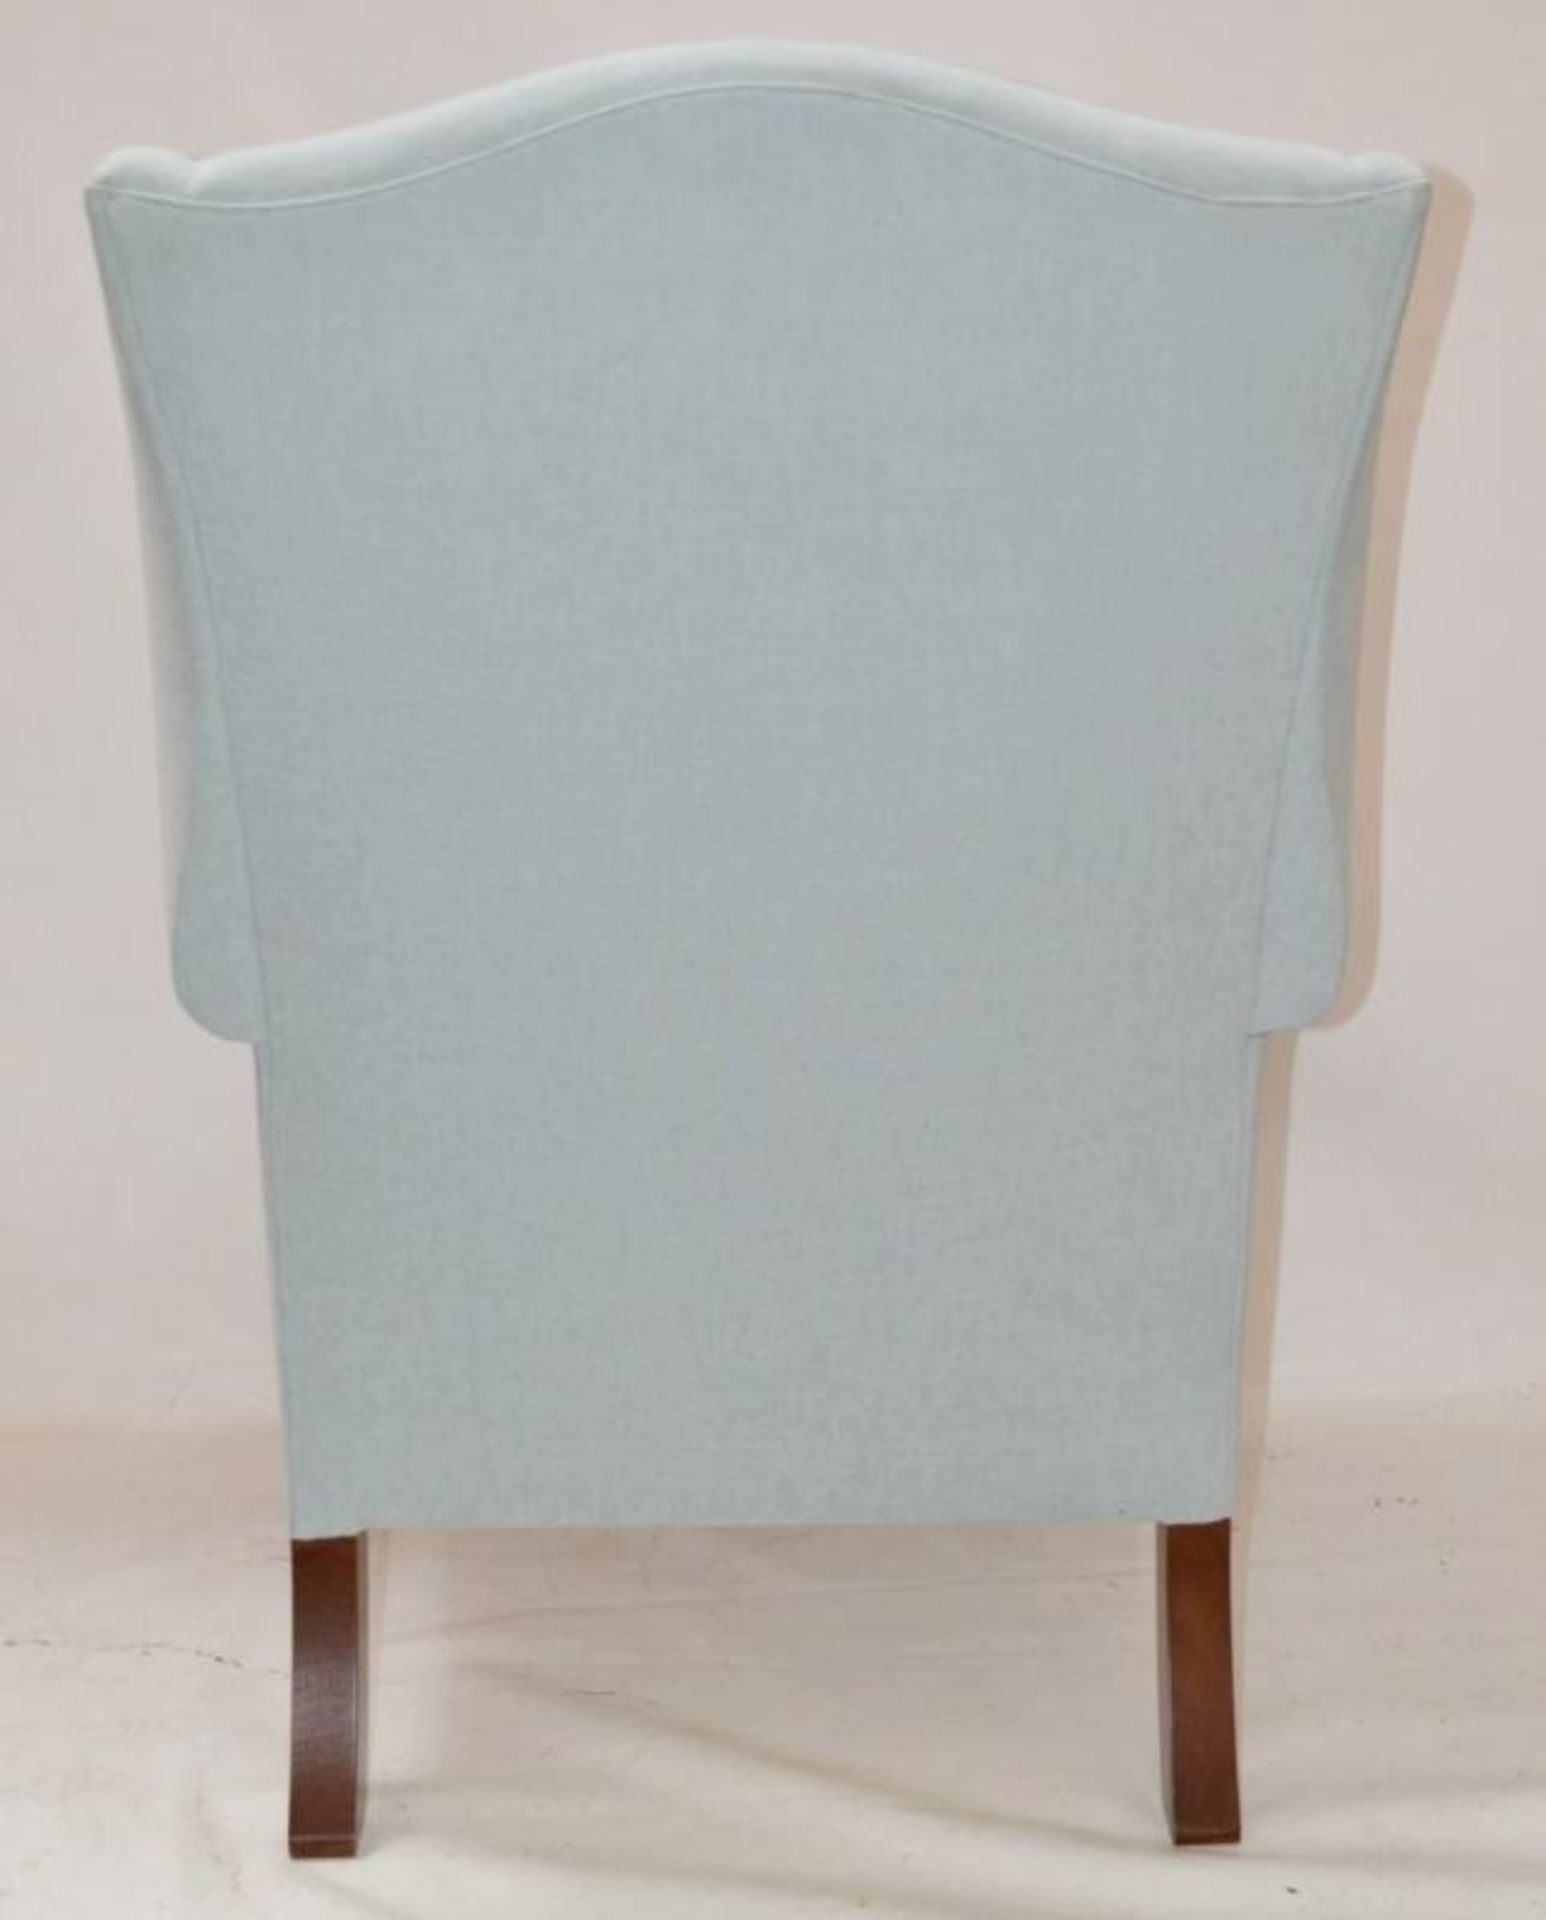 1 x Duresta "Somerset" Wing Chair Light Blue - Dimensions: 113H x 91W x 92D cms - Ref: 3143184-A NP1 - Image 3 of 8